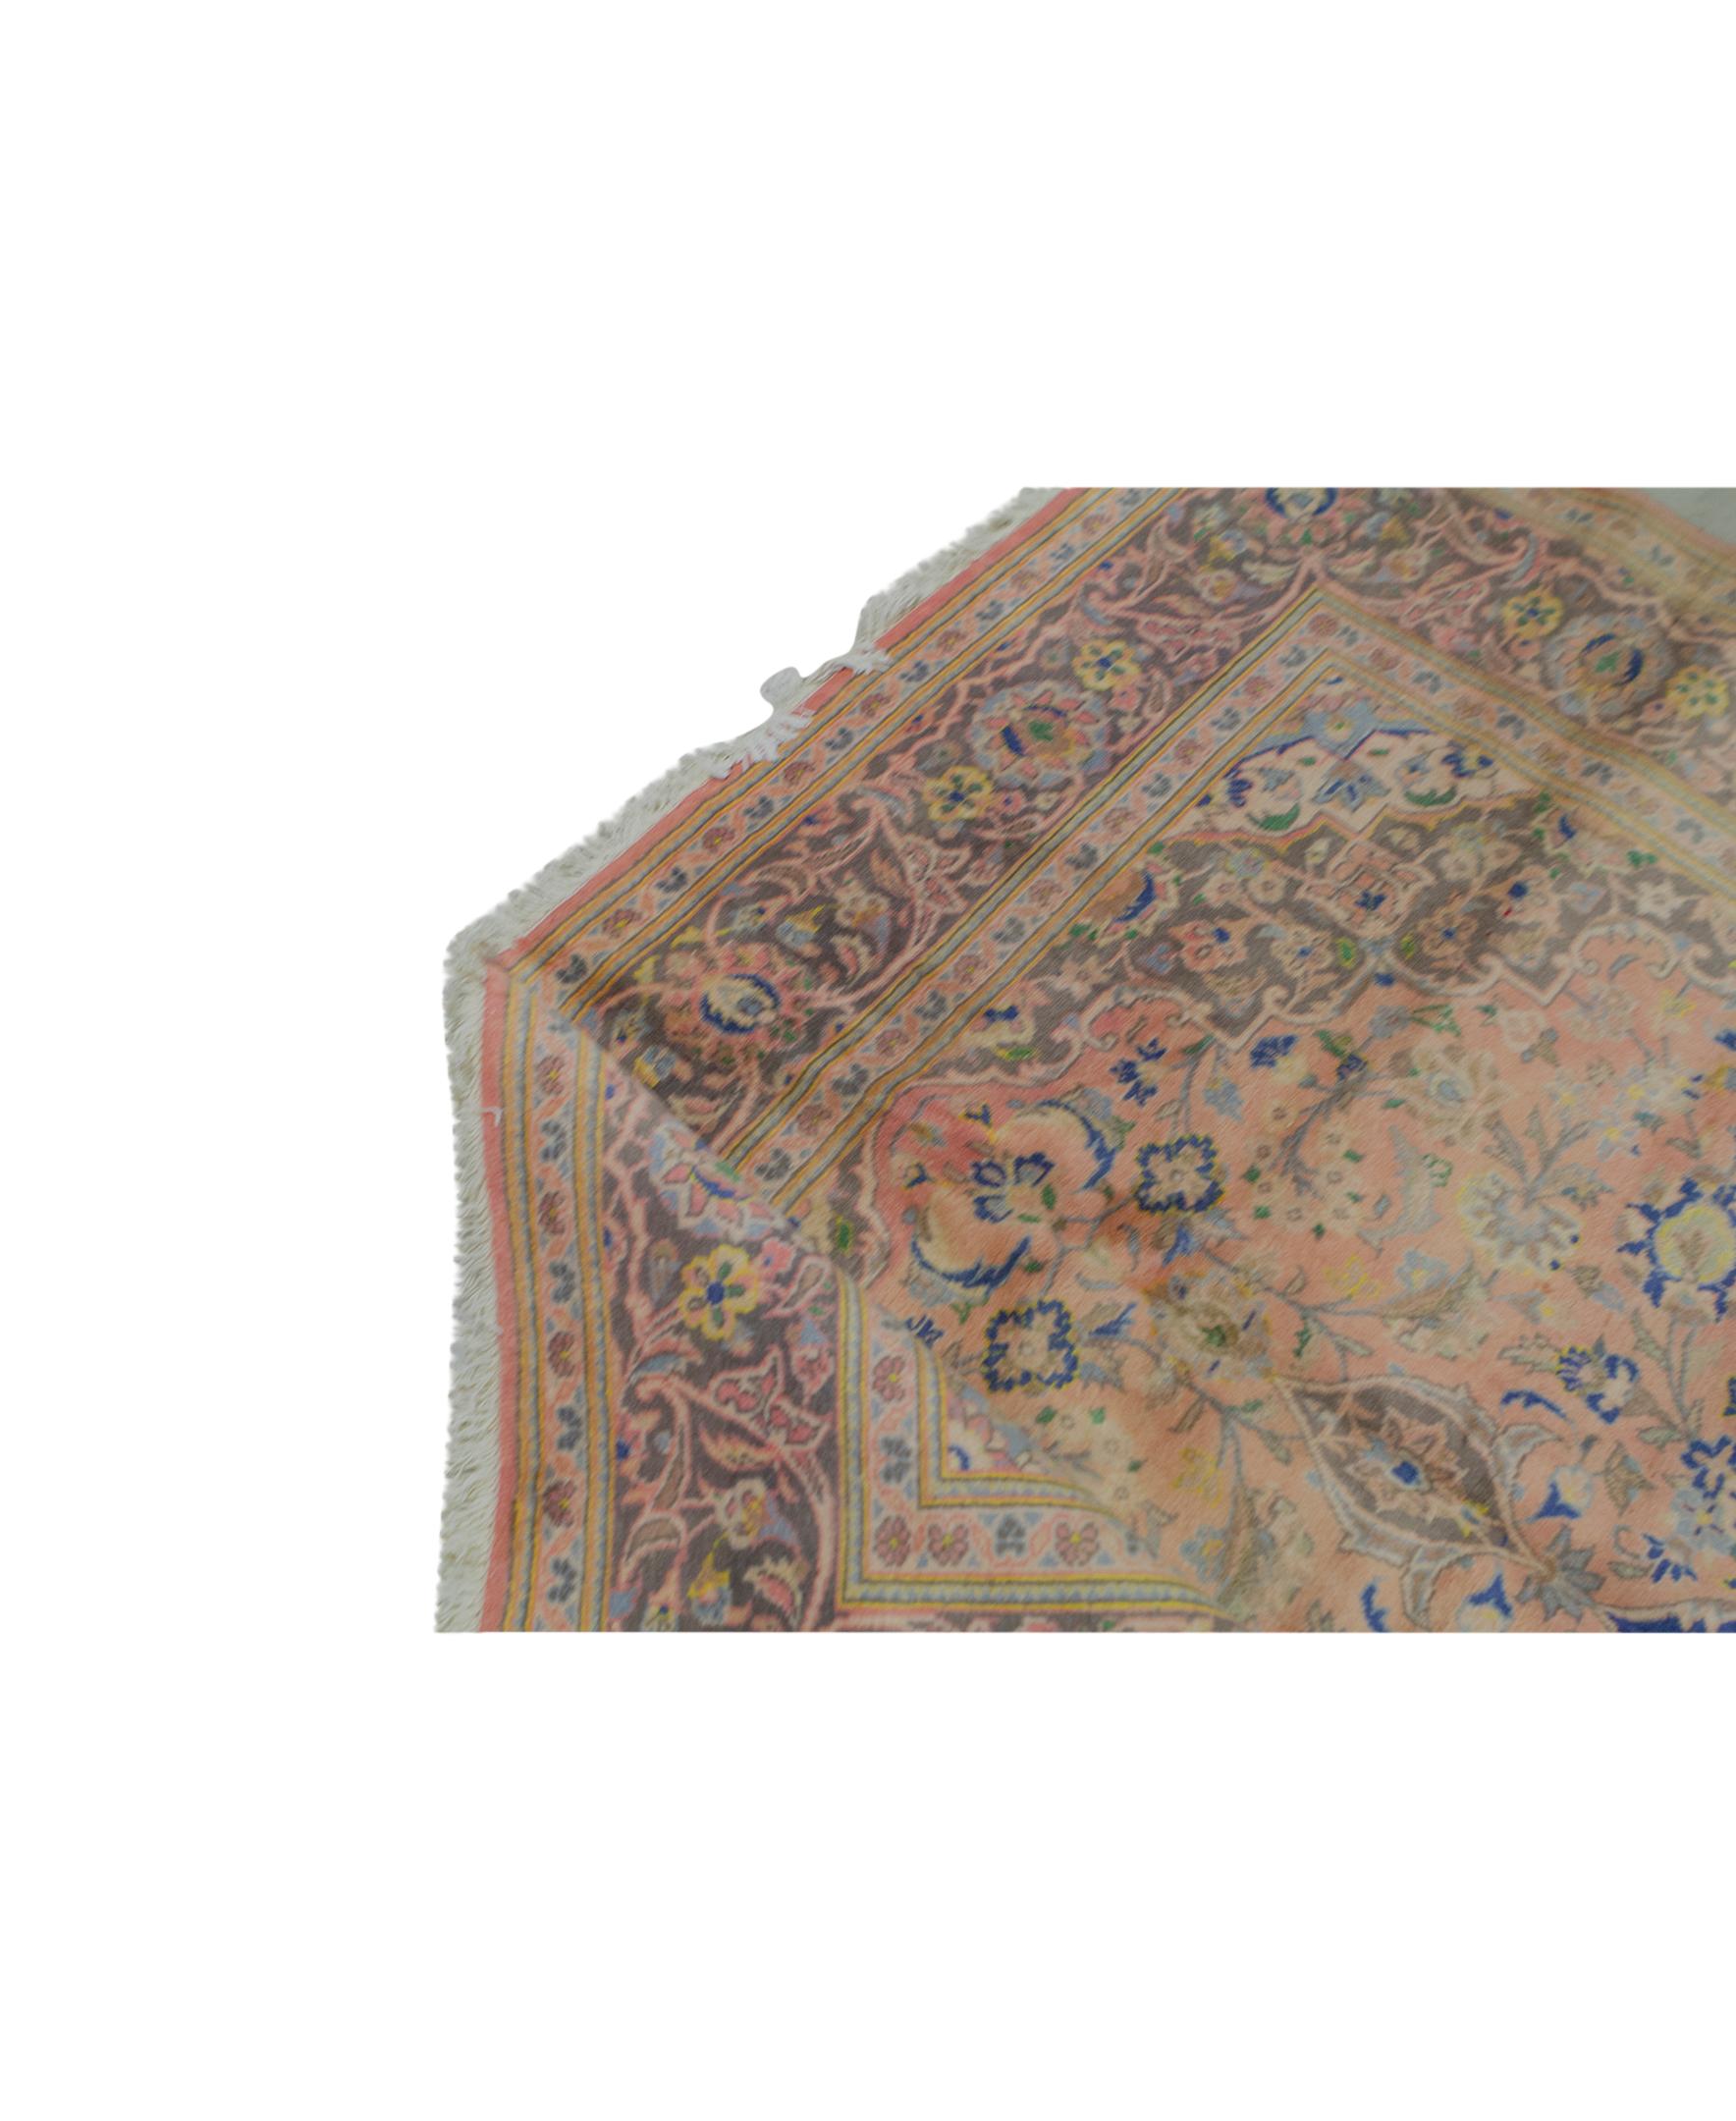 Hand-Woven  Antique Persian fine Traditional Handwoven Luxury Wool Rug For Sale